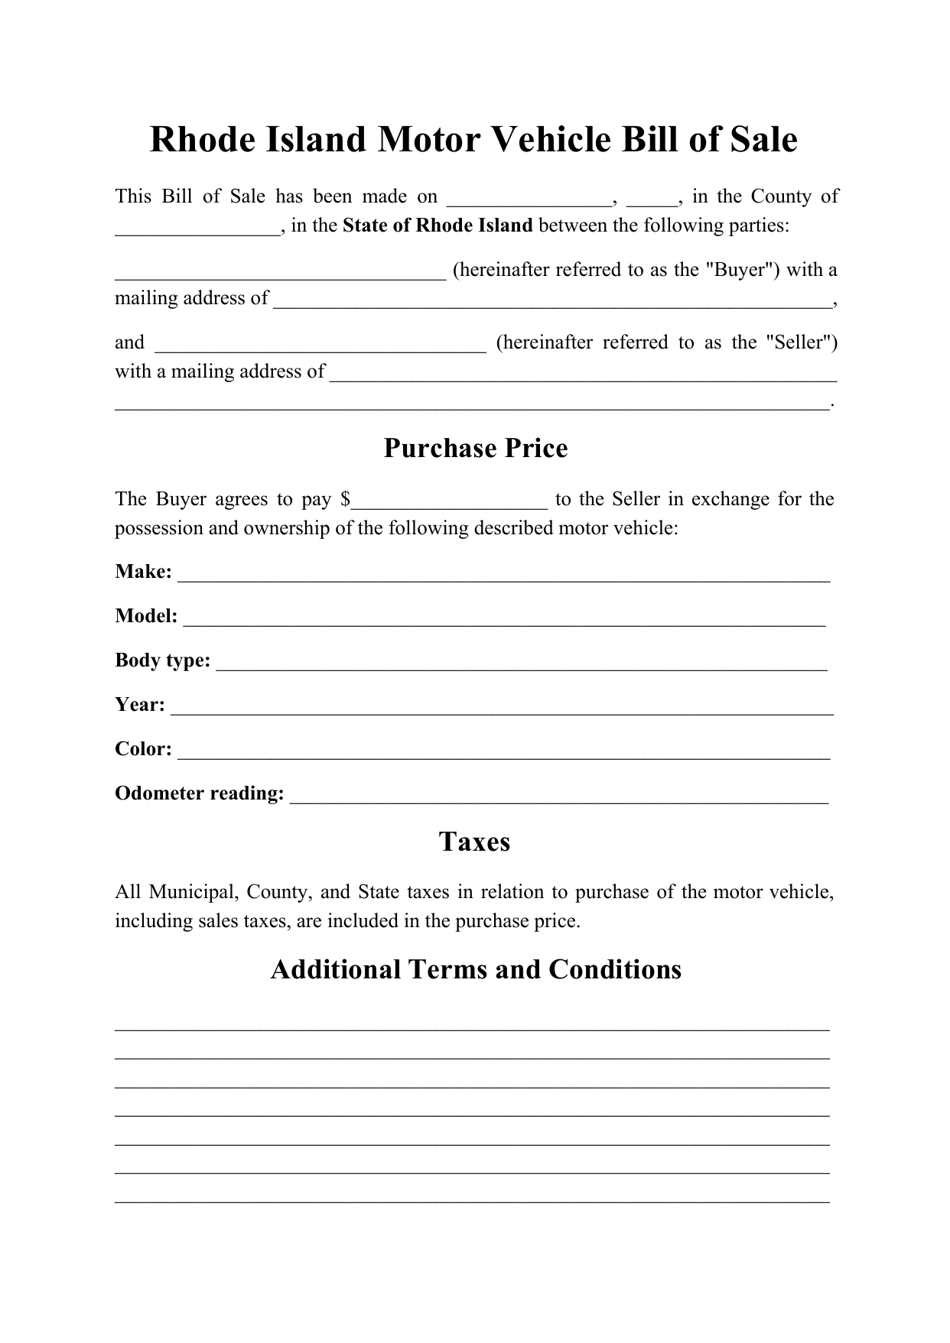 Rhode Island Motor Vehicle Bill of Sale Download Printable PDF For Bill Of Sale Template Ri